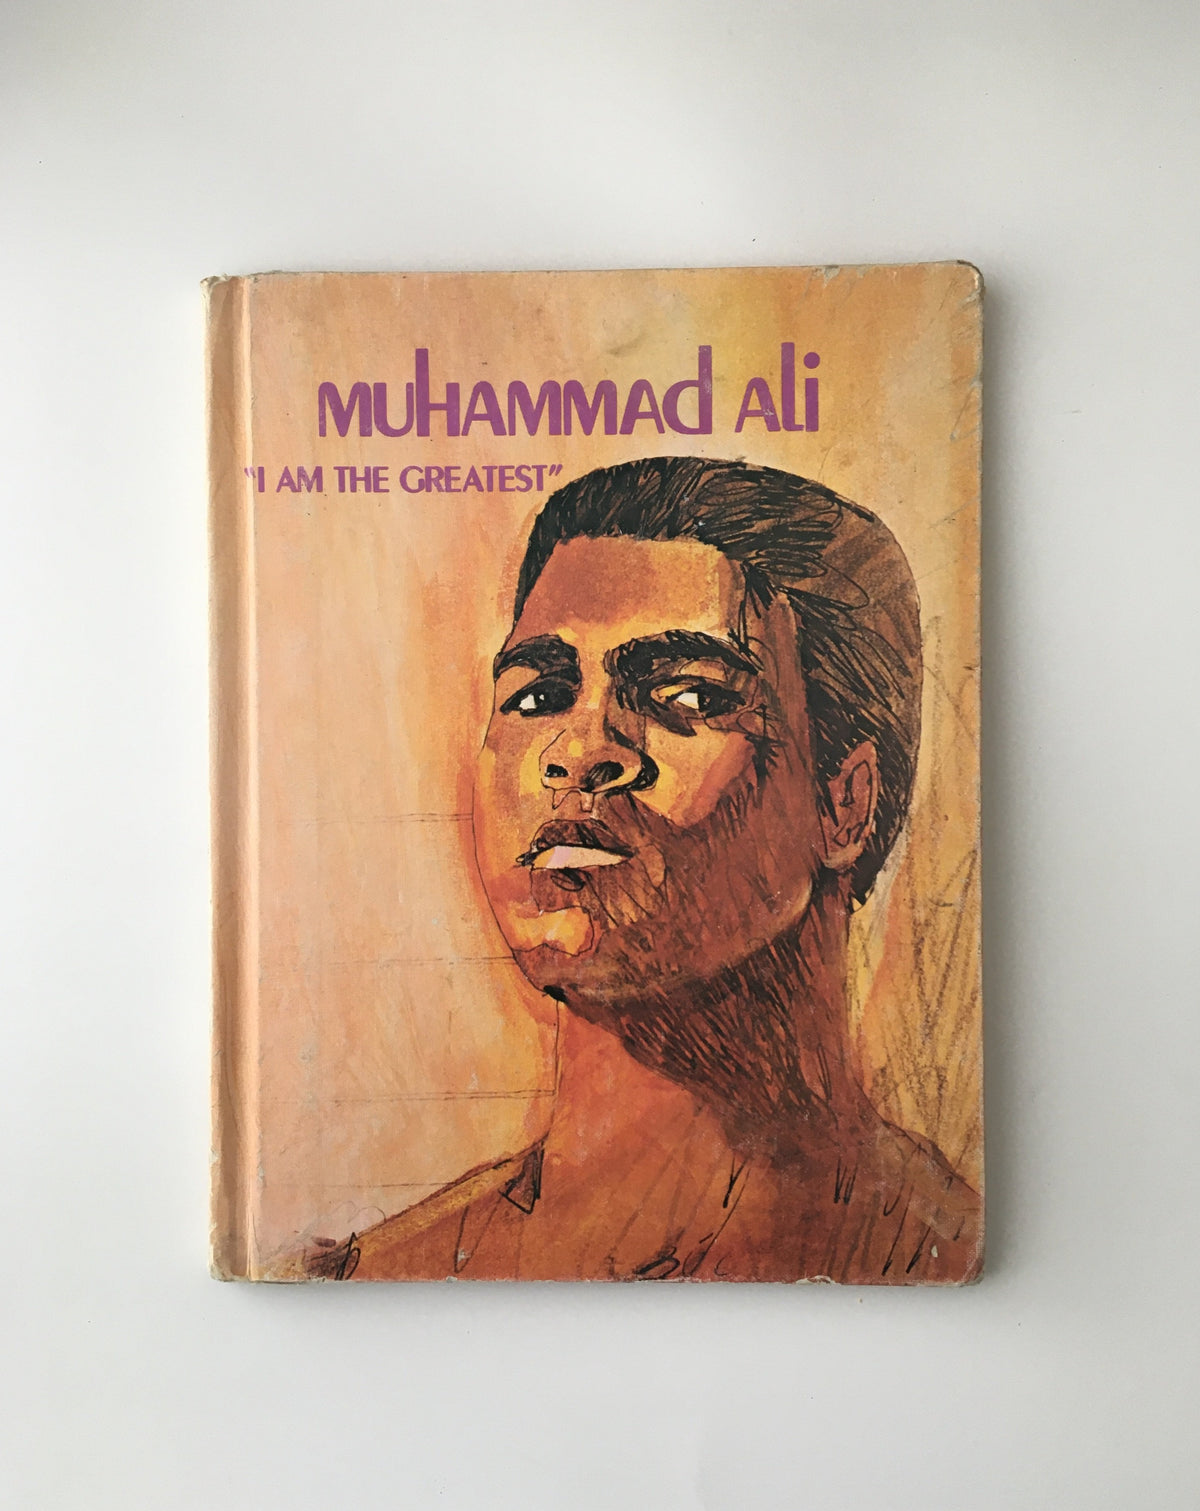 Muhammad Ali: I am the Greatest by James T. Olsen